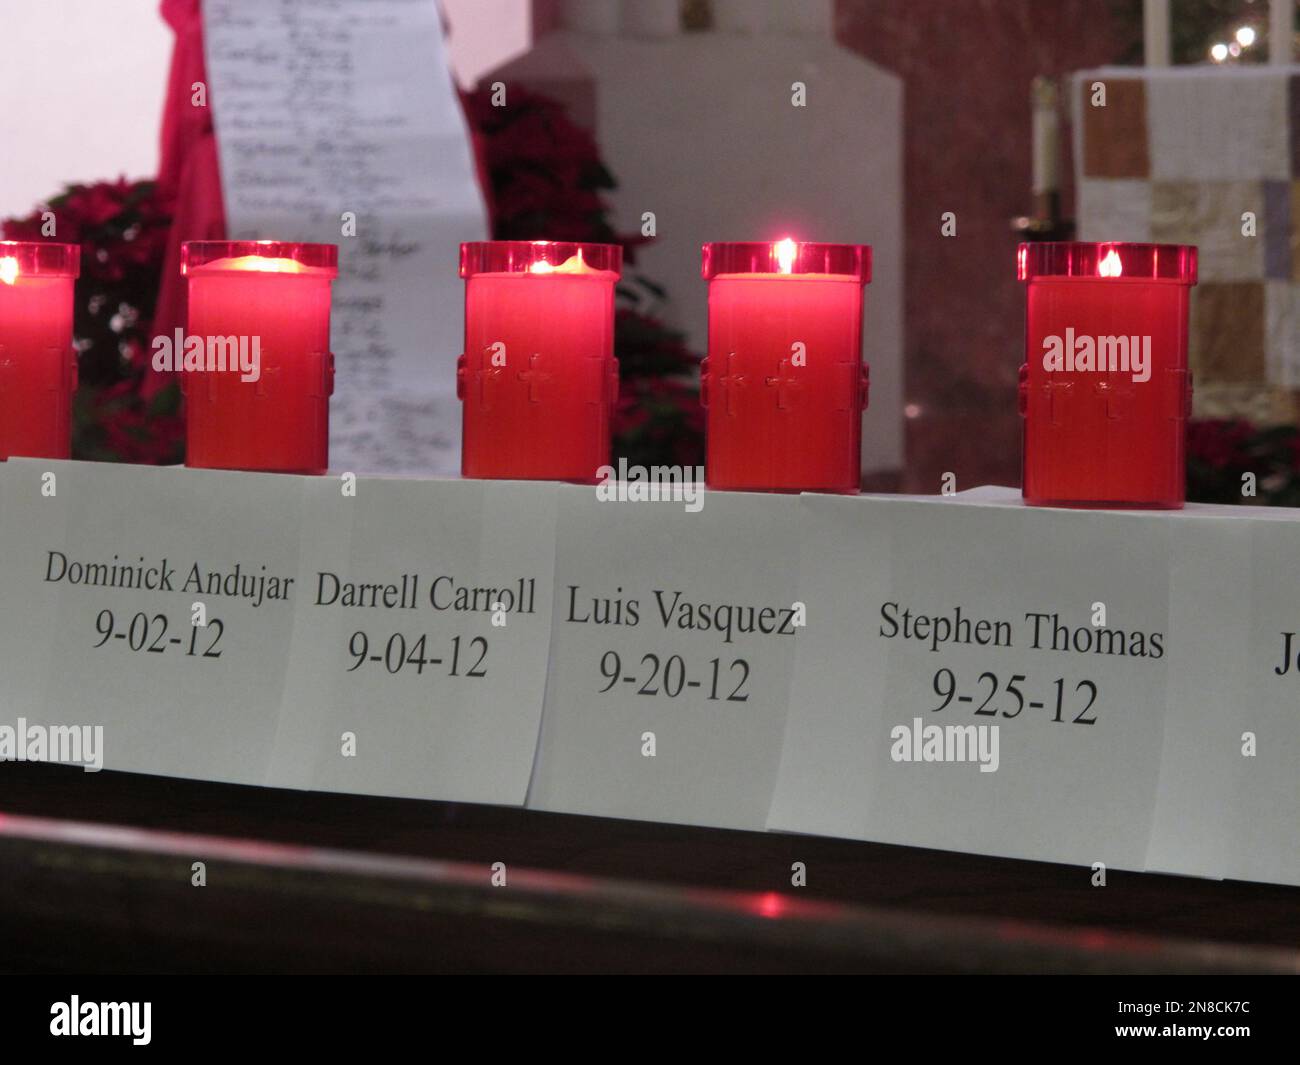 Candles in honor of victims of homicide in Camden, N.J., burn during a vigil at Cathedral of the Immaculate Conception in Camden, N.J., on Dec. 31, 2012. In the annual vigil, an hour is dedicated to remembering each homicide victim. The city of 77,000 had a record 67 homicides in 2012. (AP Photo/Geoff Mulvihill) Stock Photo